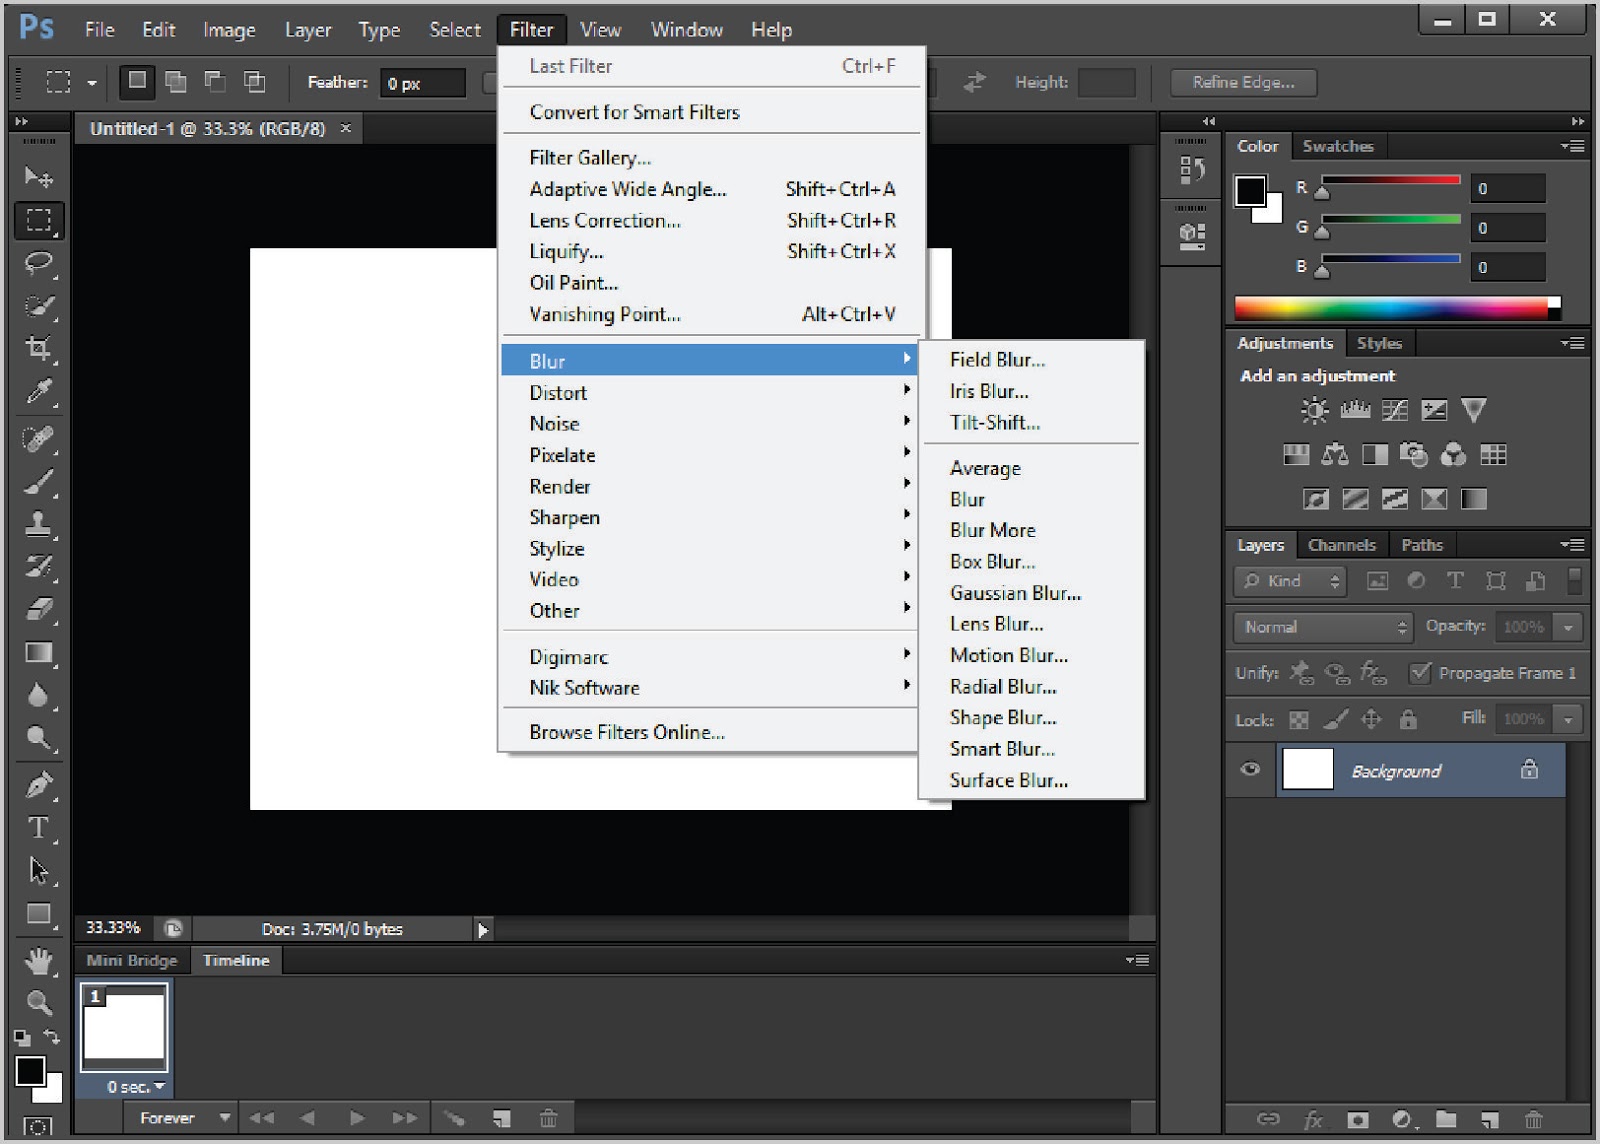 how to install a cracked version of photoshop cs6